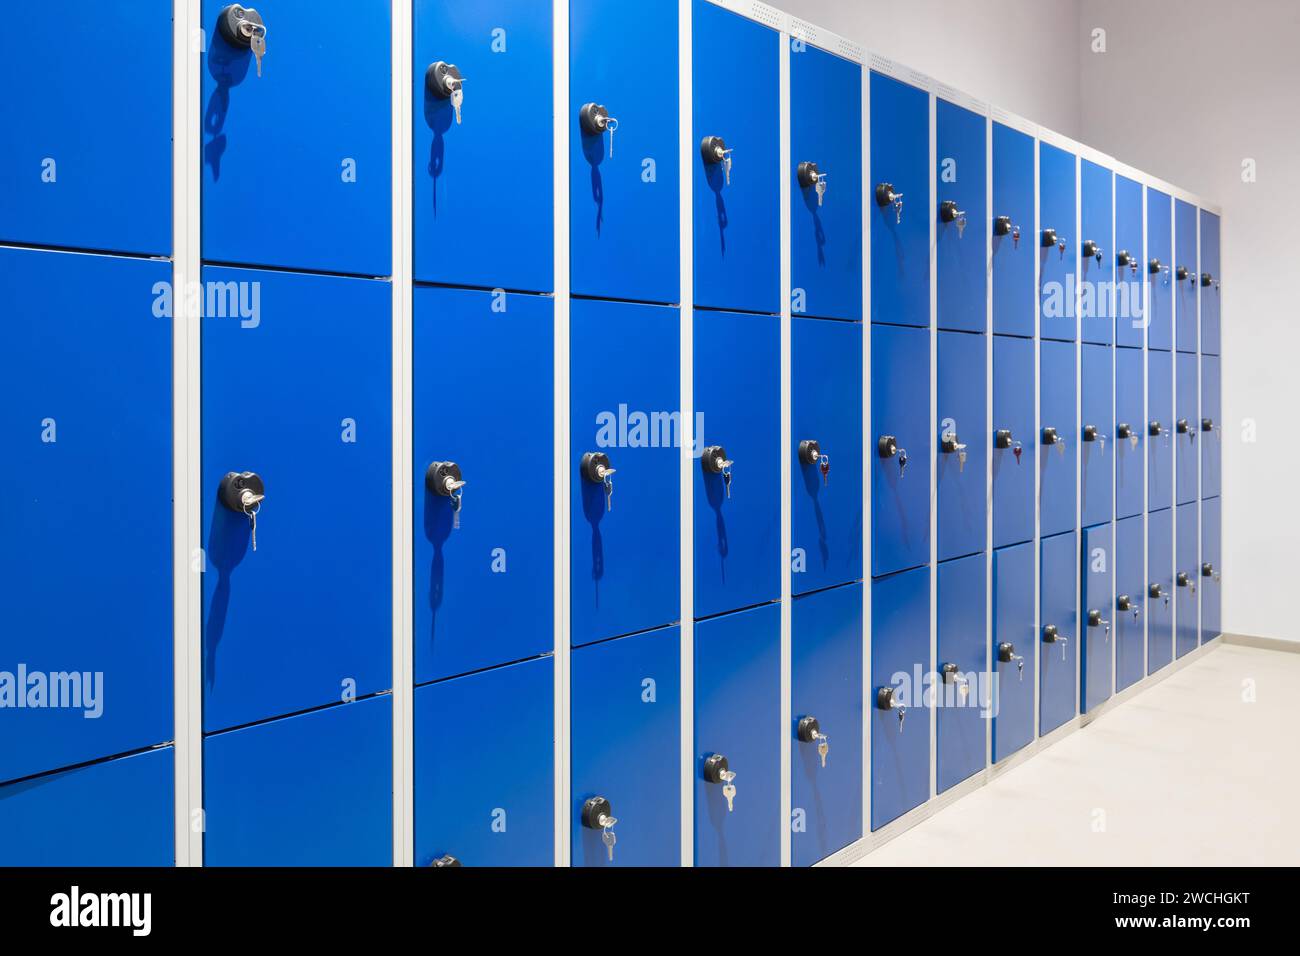 - images and hi-res photography lockers Metallic Alamy stock